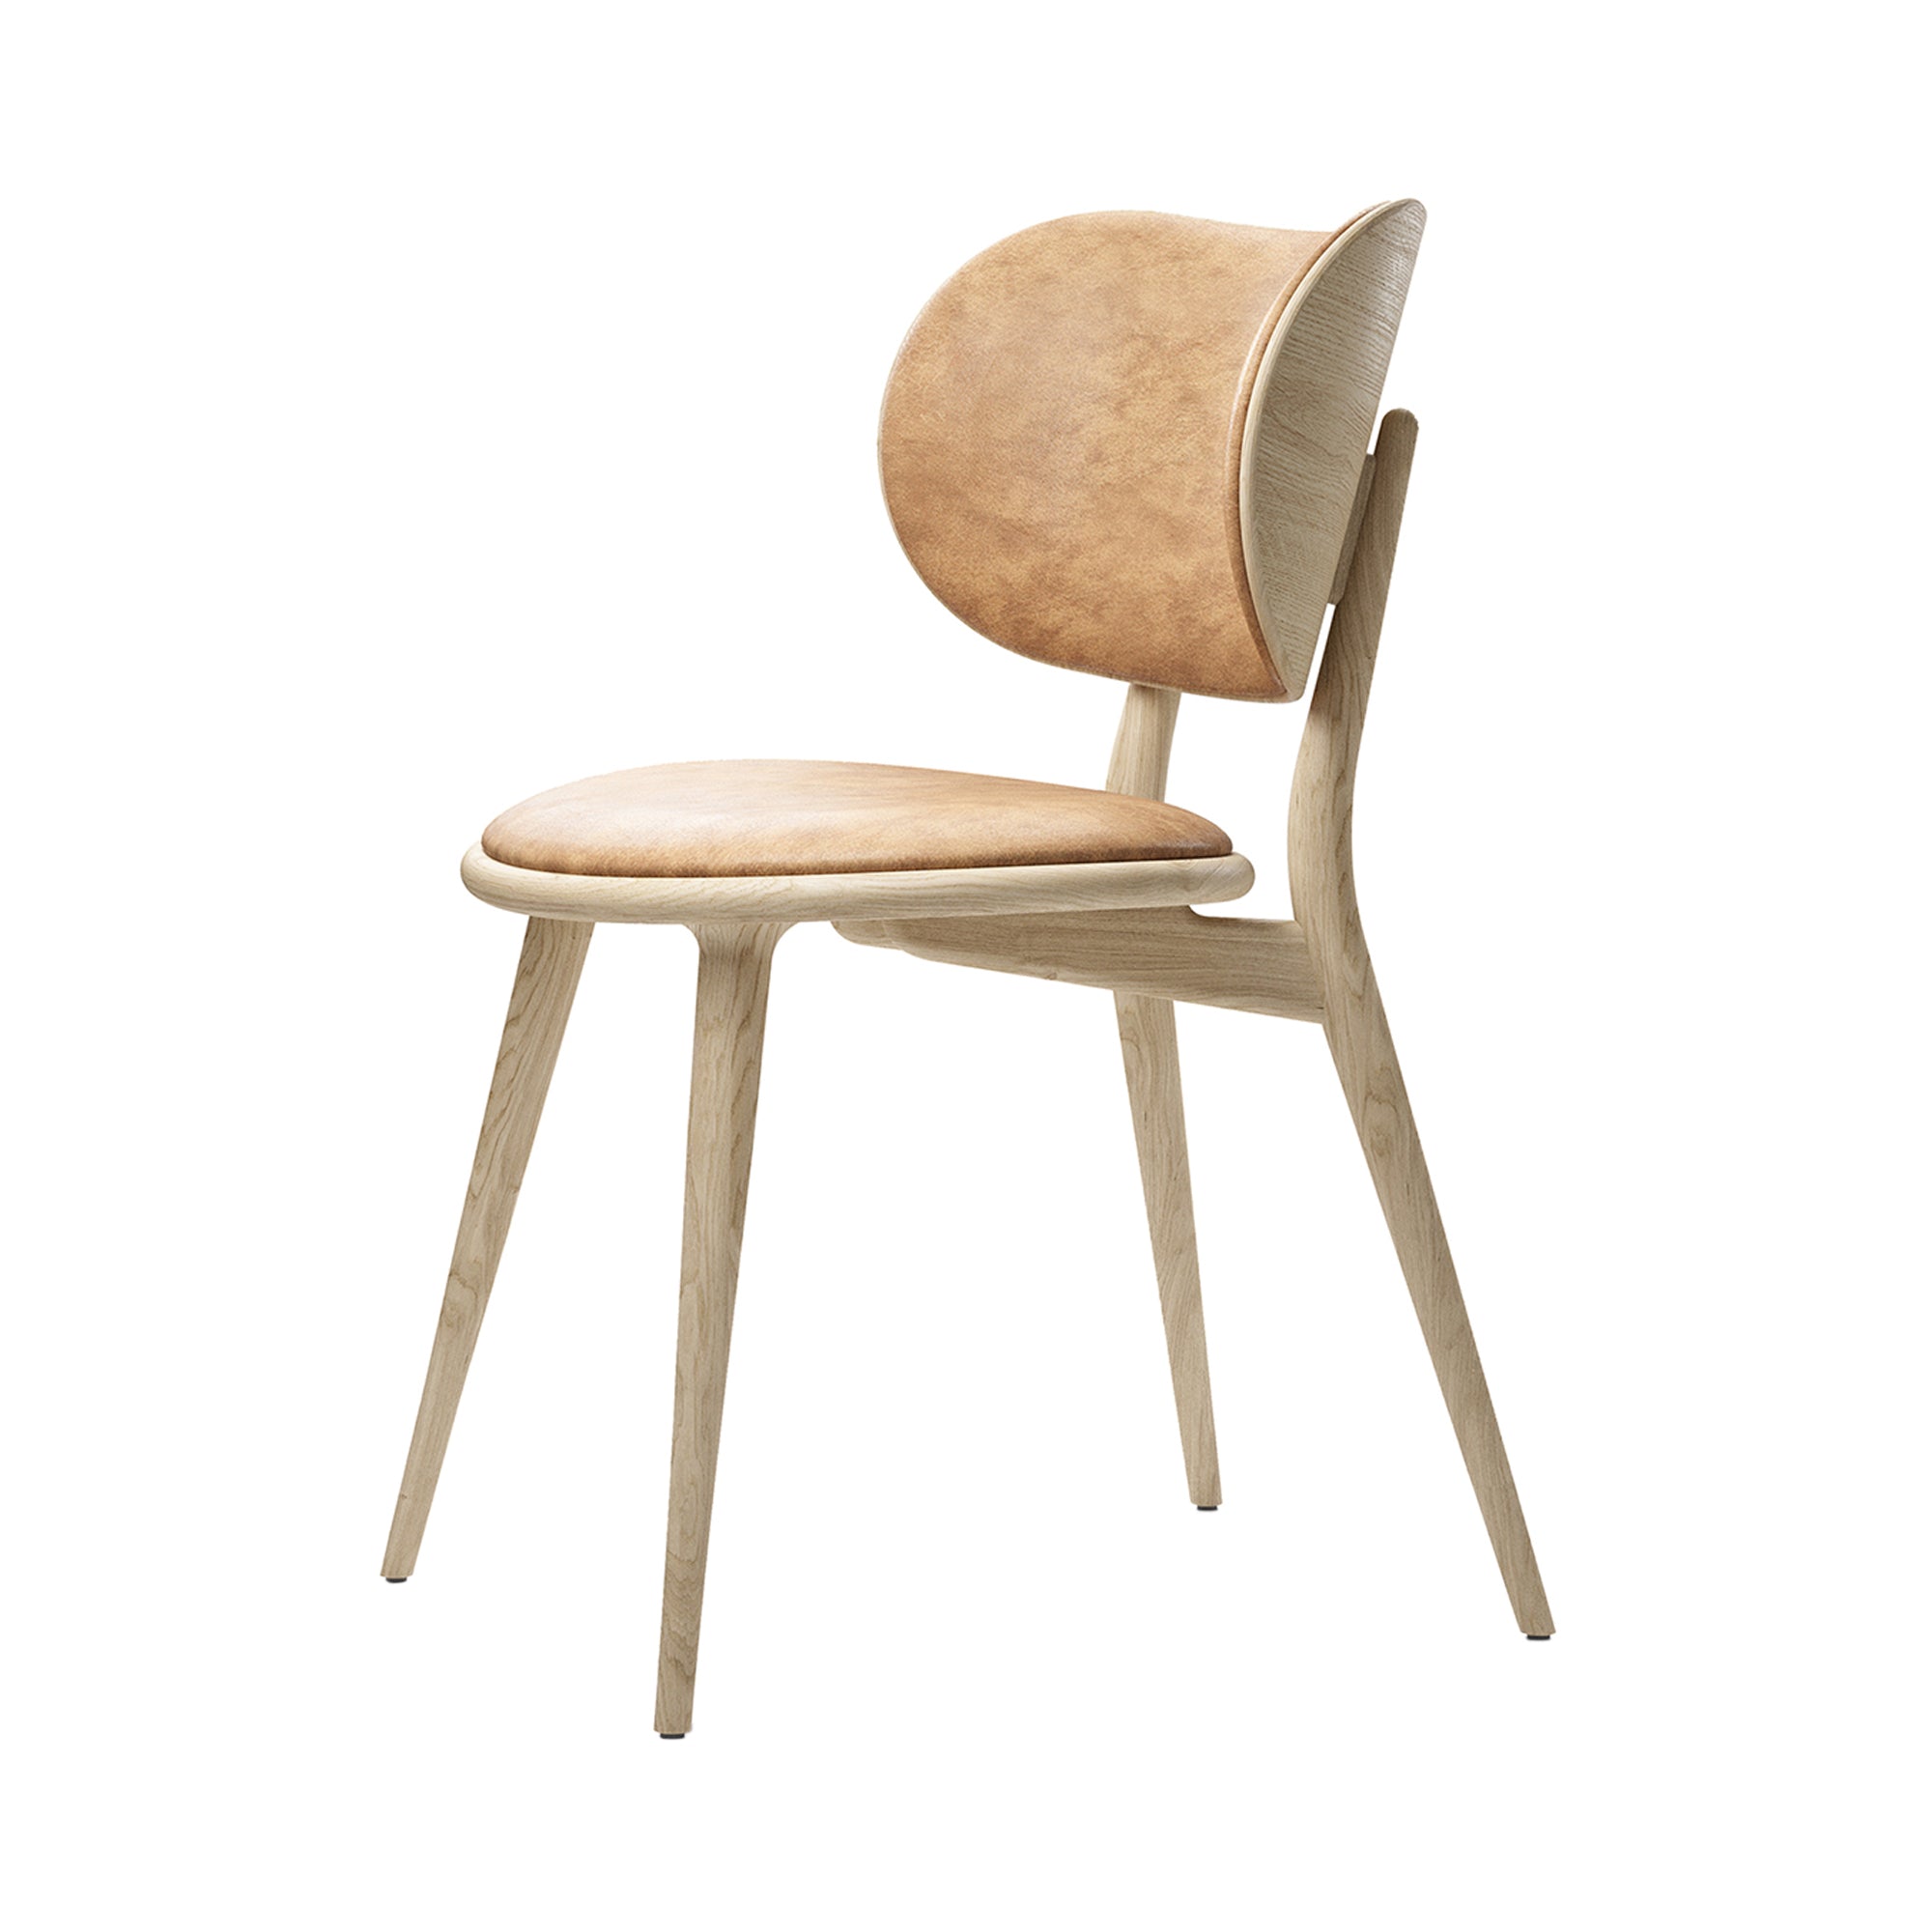 The Dining Chair: Matt Lacquered Oak + Natural Tanned Leather